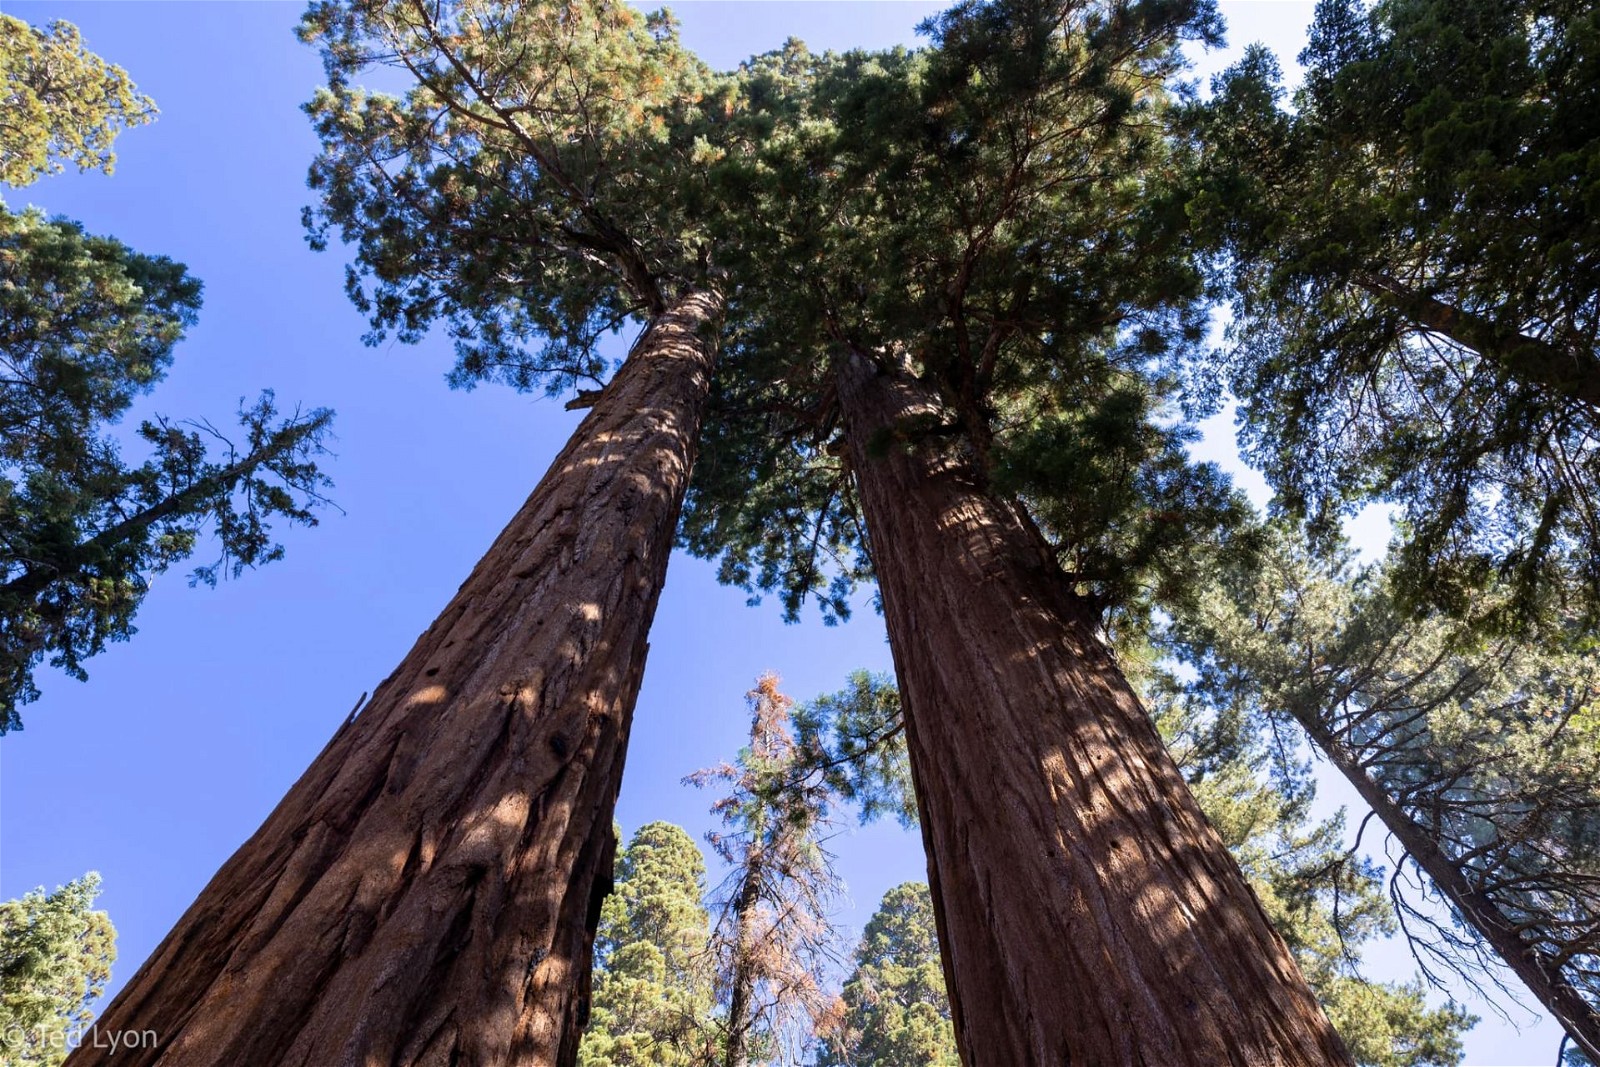 How to Get to Sequoia National Park?